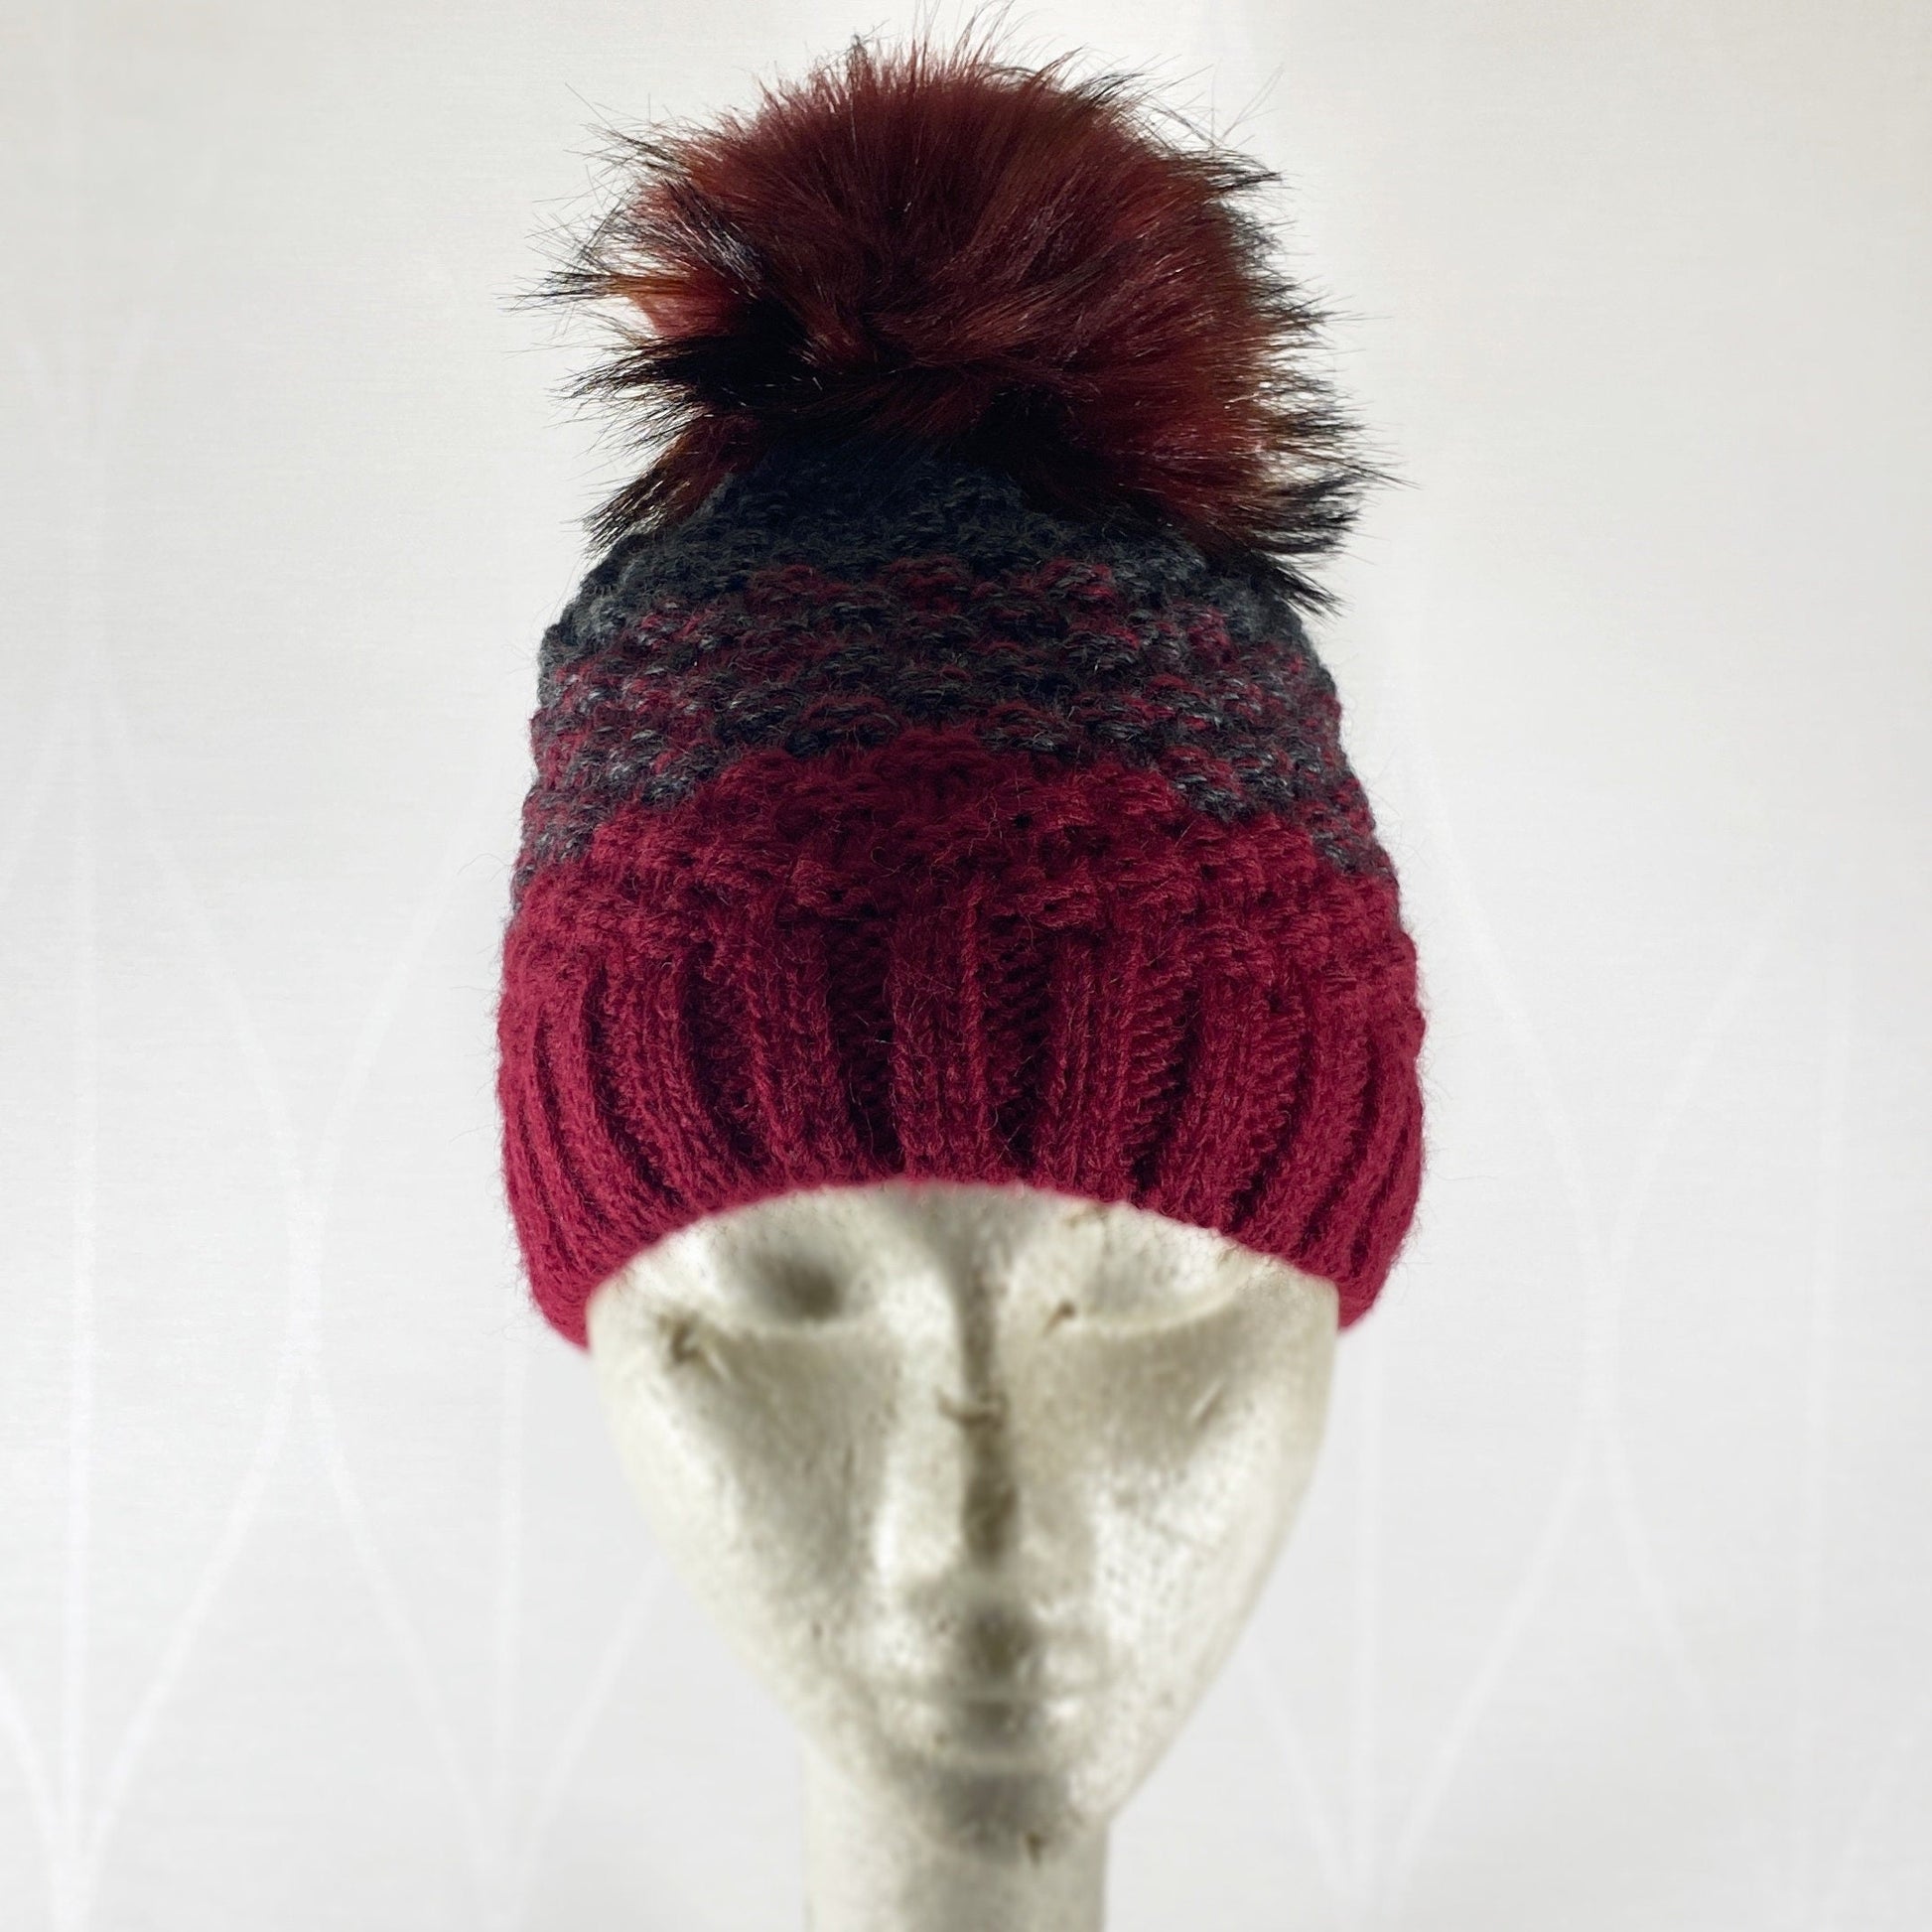 Wine Red Winter Beanie With Pompom - Made From Italian Wool, Acrylic Yarn, and Faux Fur